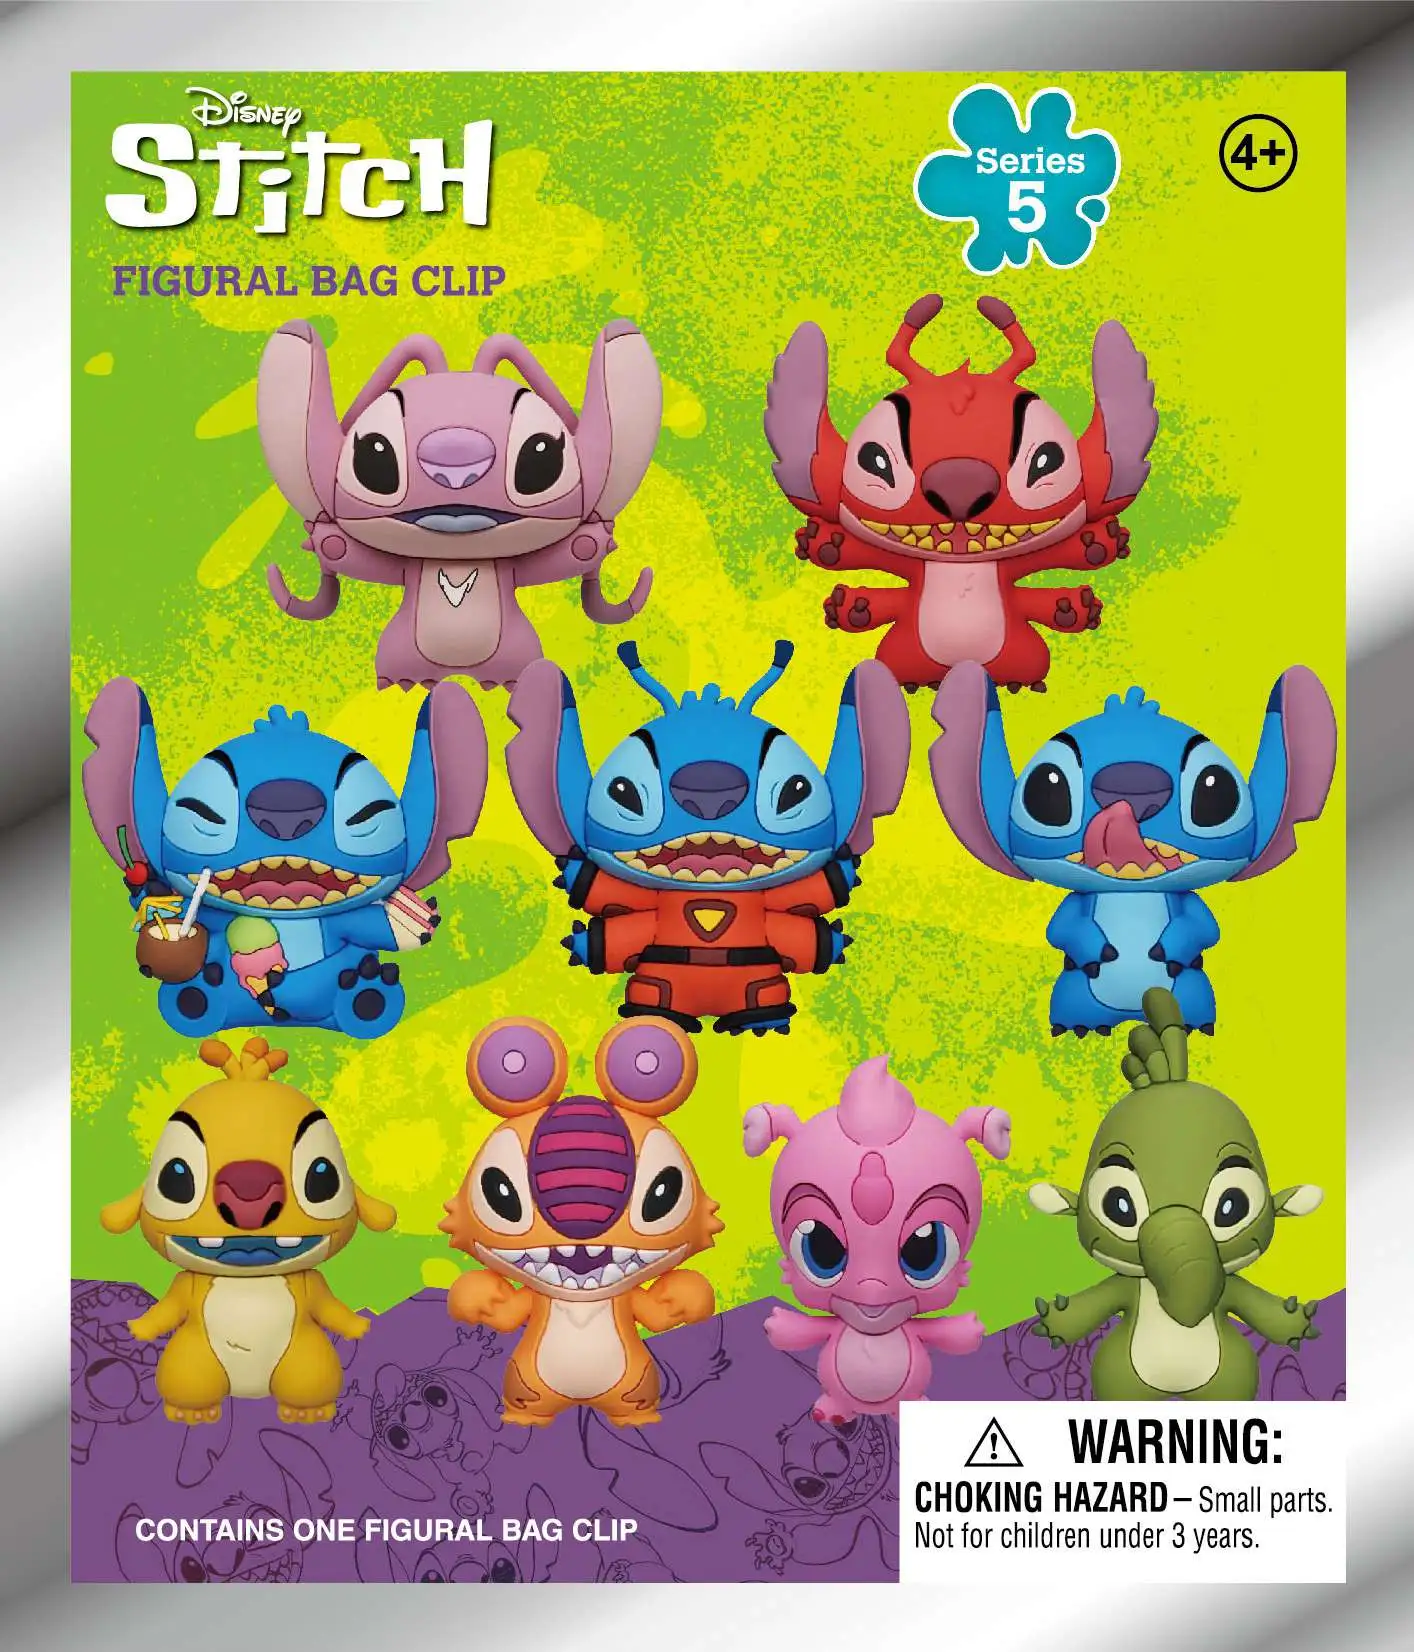 Stitch Disney Doorables Series 1/3 Lilo and Stitch with or Without